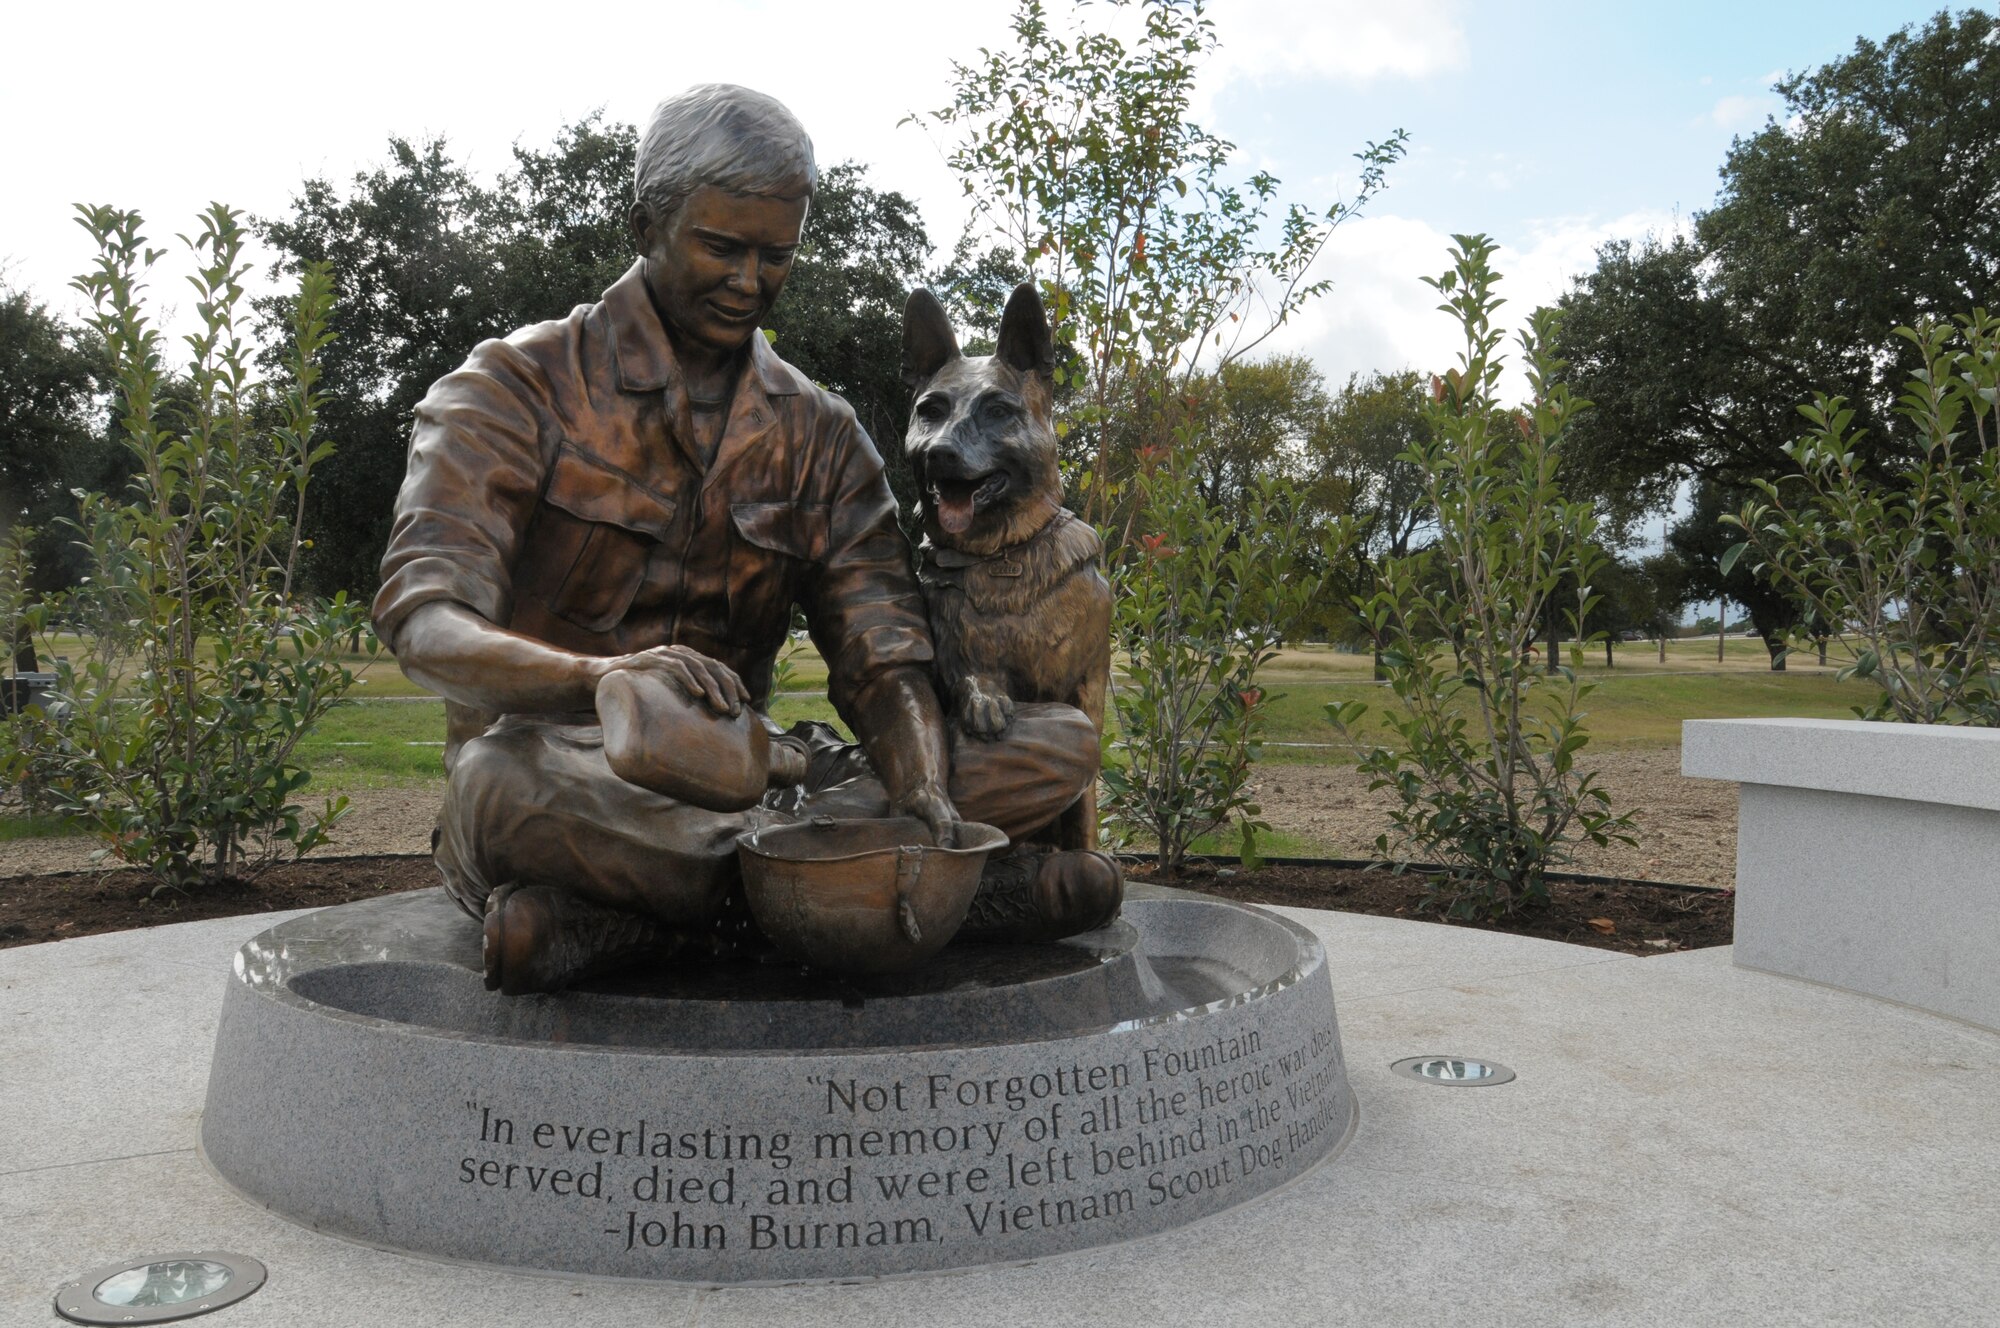 The Military Working Dog Teams’ National Monument, which includes a statue of a handler with his dog, was revealed Oct. 28, 2013 at Joint Base San Antonio-Lackland, Texas. There was also a wall with a montage of images of handlers with their canines and a statue of an Airman that was accompanied by four dog statues. (U.S. Air Force photo by Airman 1st Class Krystal M. Jeffers/Released)